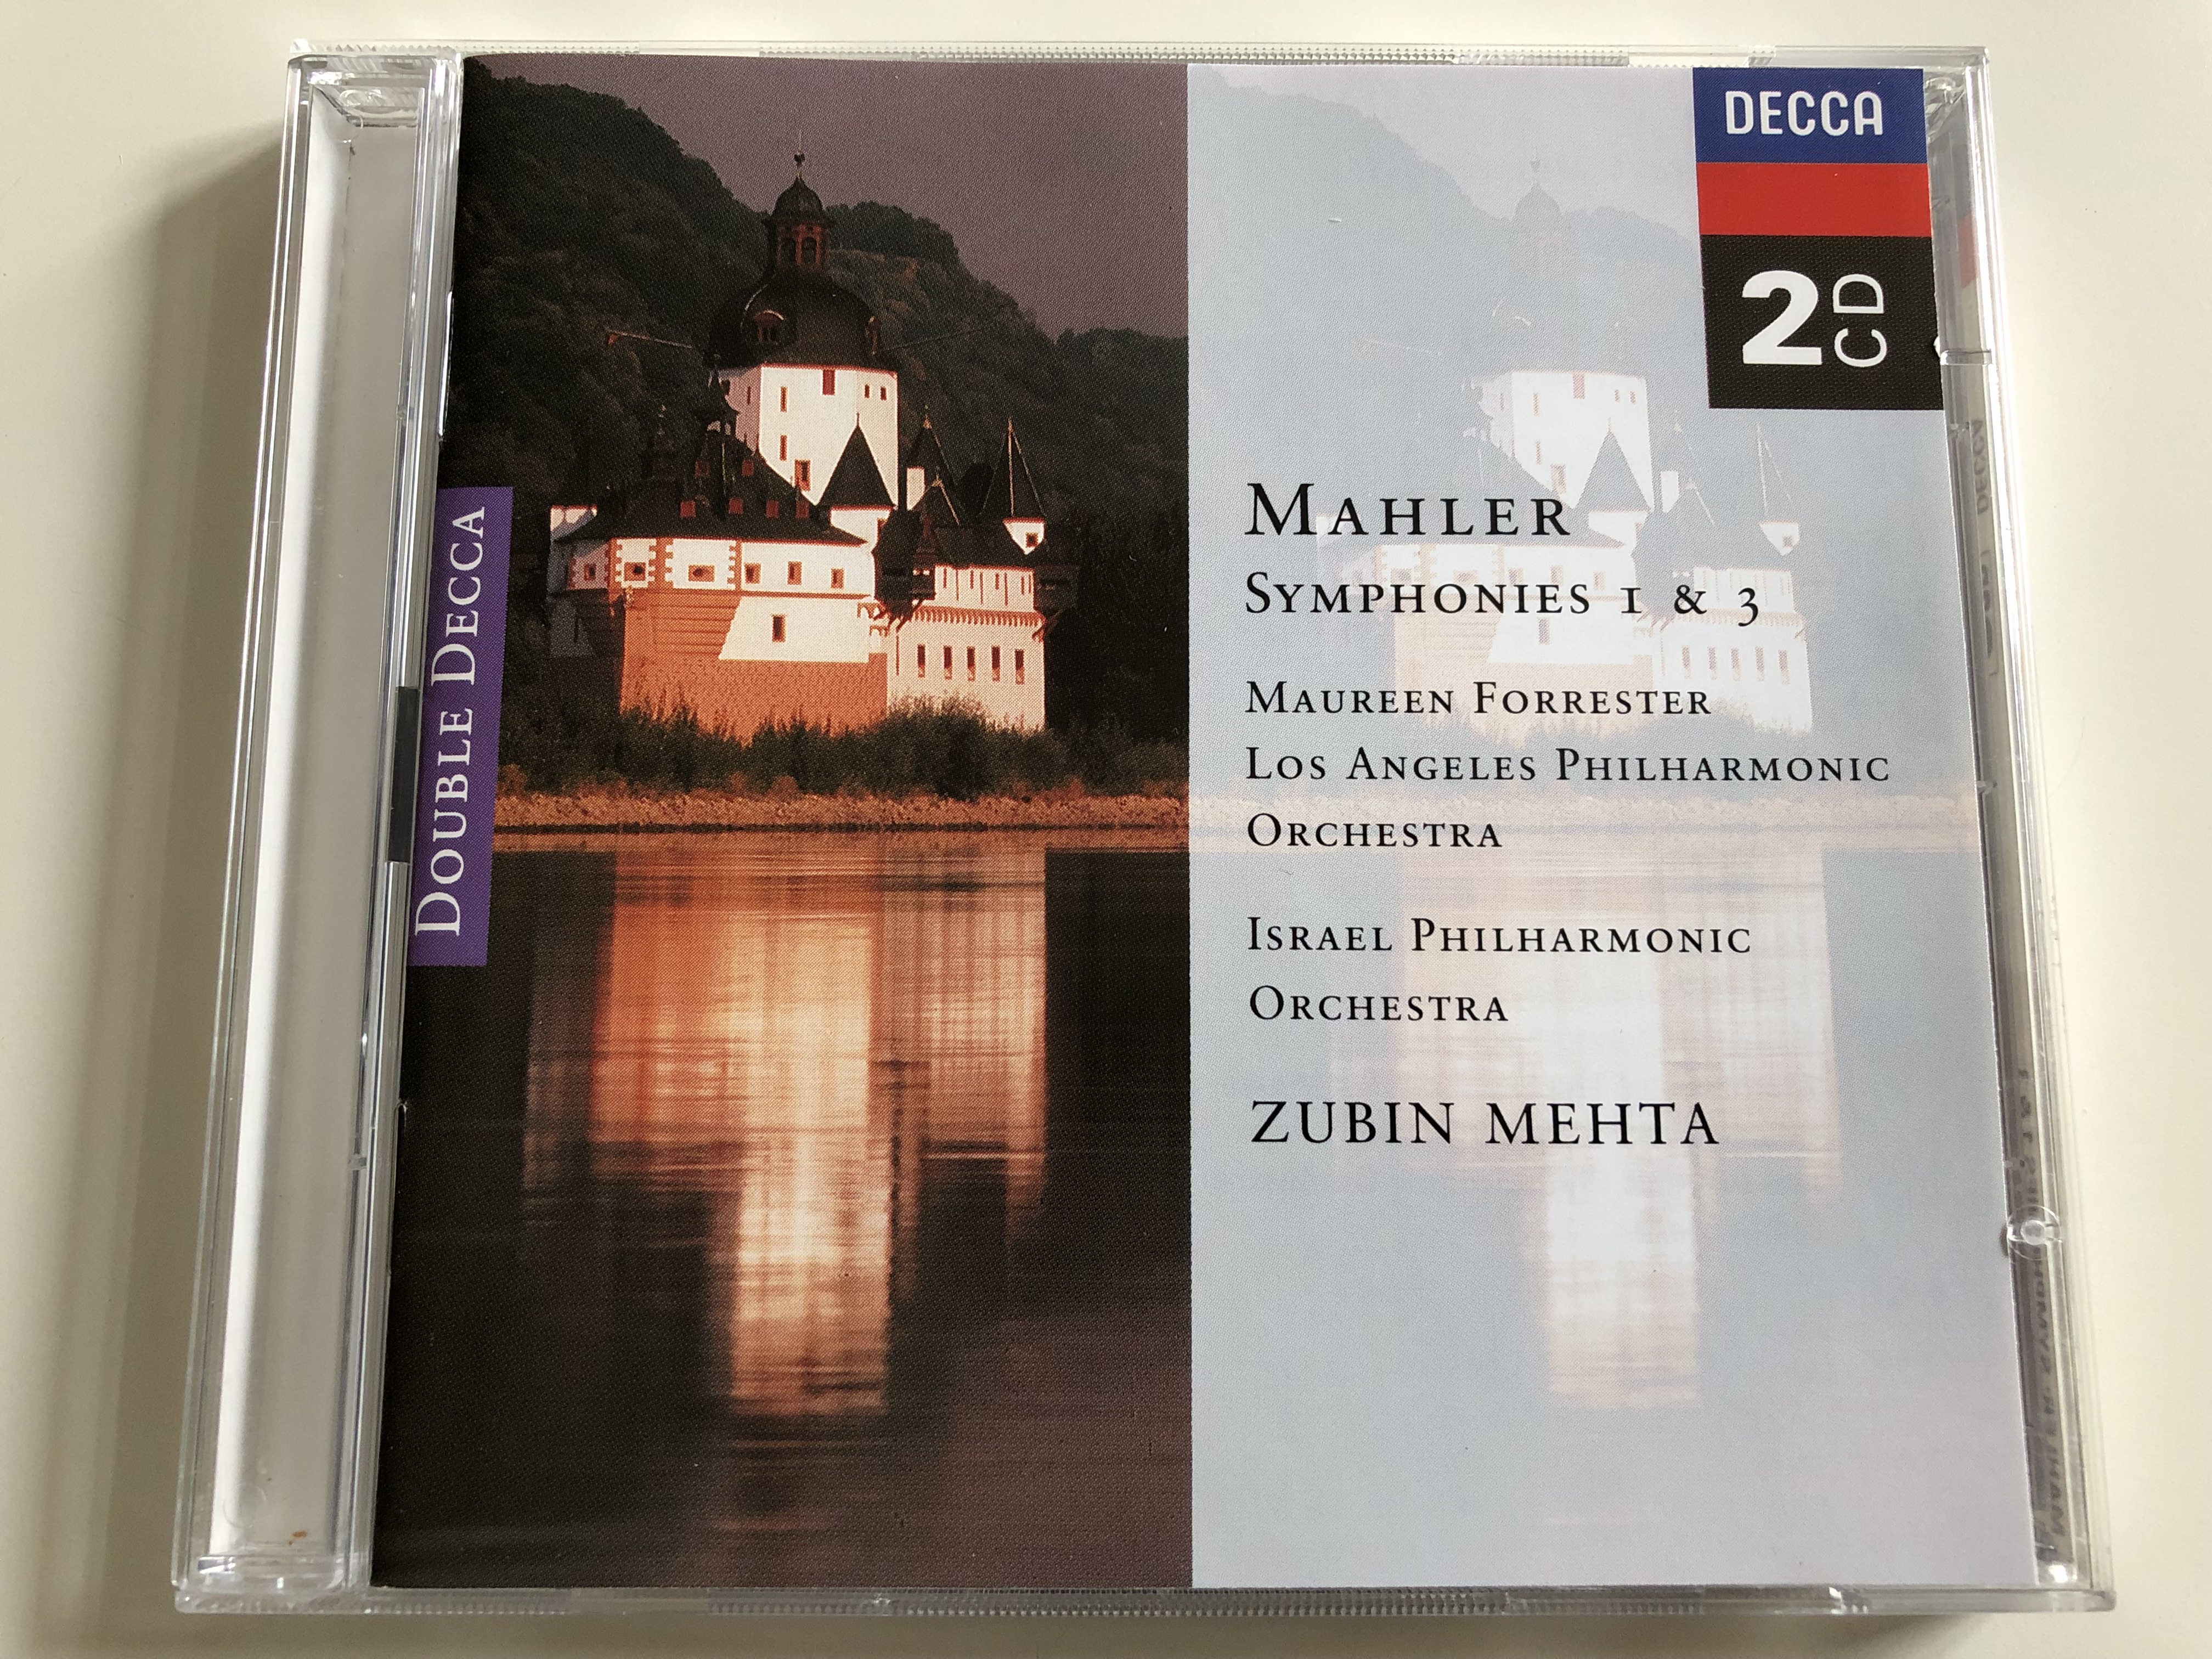 mahler-symphonies-1-3-maureen-forrester-los-angeles-philharmonic-orchestra-israel-philharmonic-orchestra-conducted-by-zubin-mehta-2x-audio-cd-1994-decca-ba-925-1-.jpg